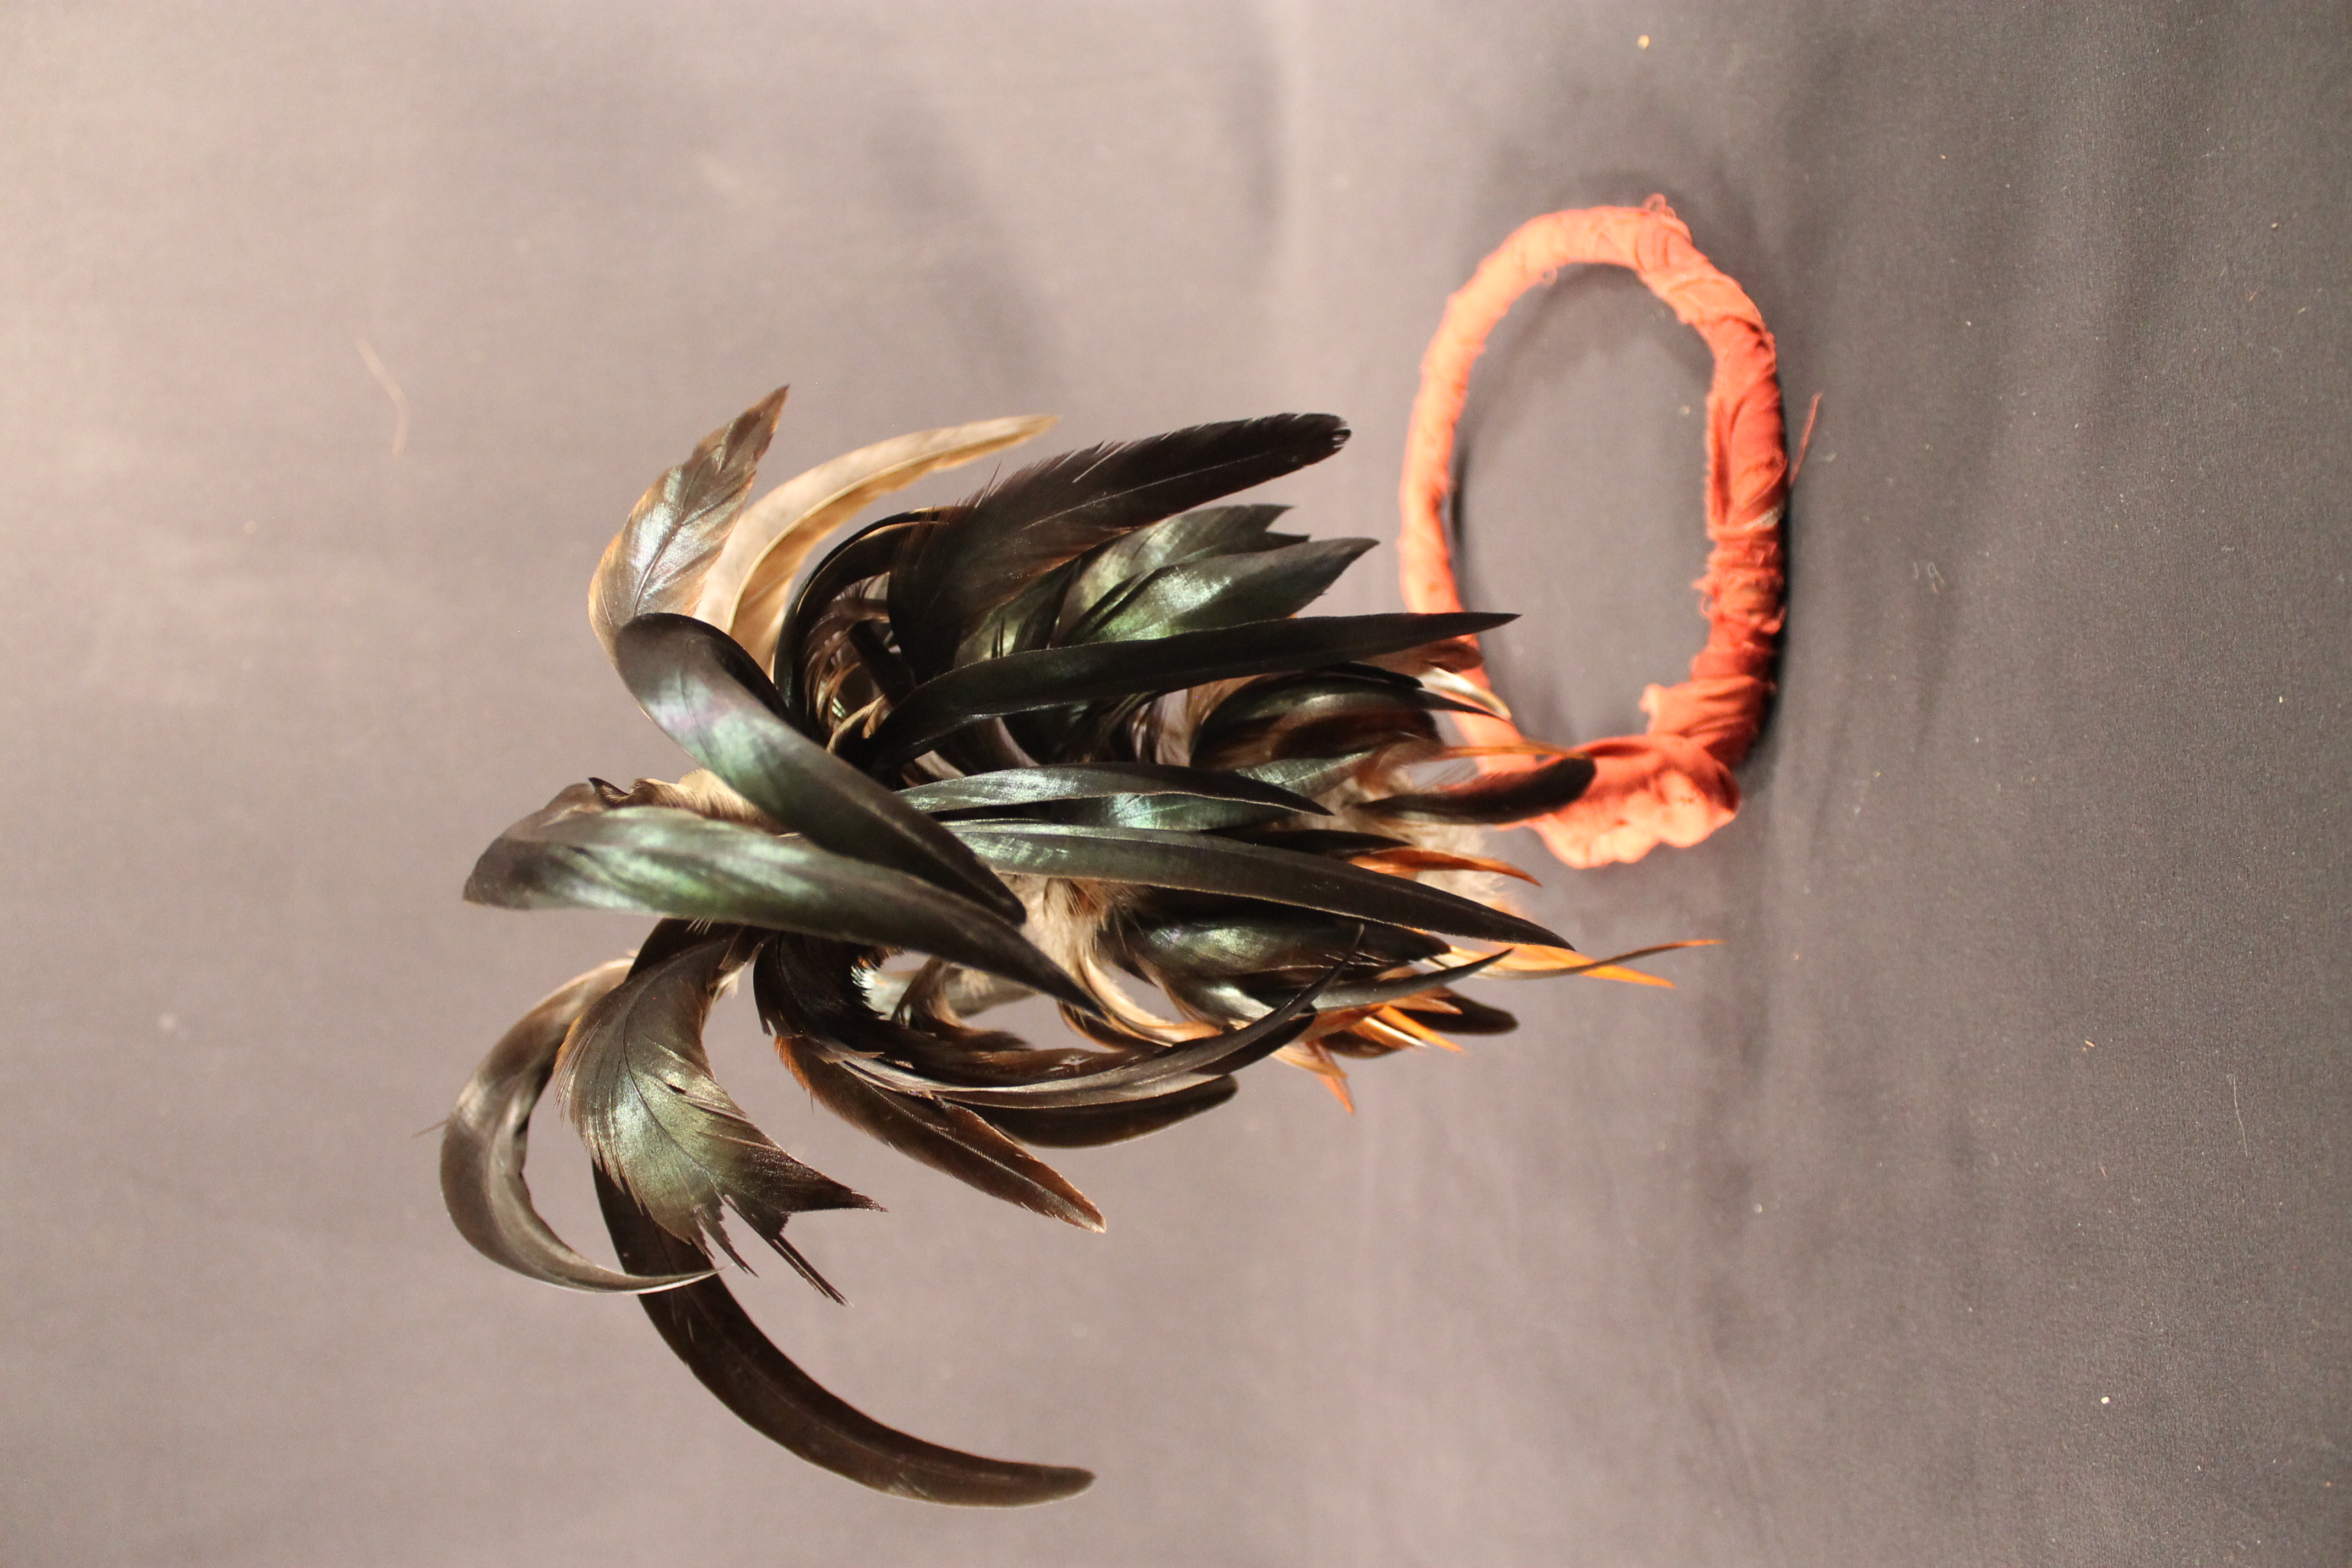 Headdress with metal base wrapped in a red cloth decorated with iridescent, green, and brown feathers on top.